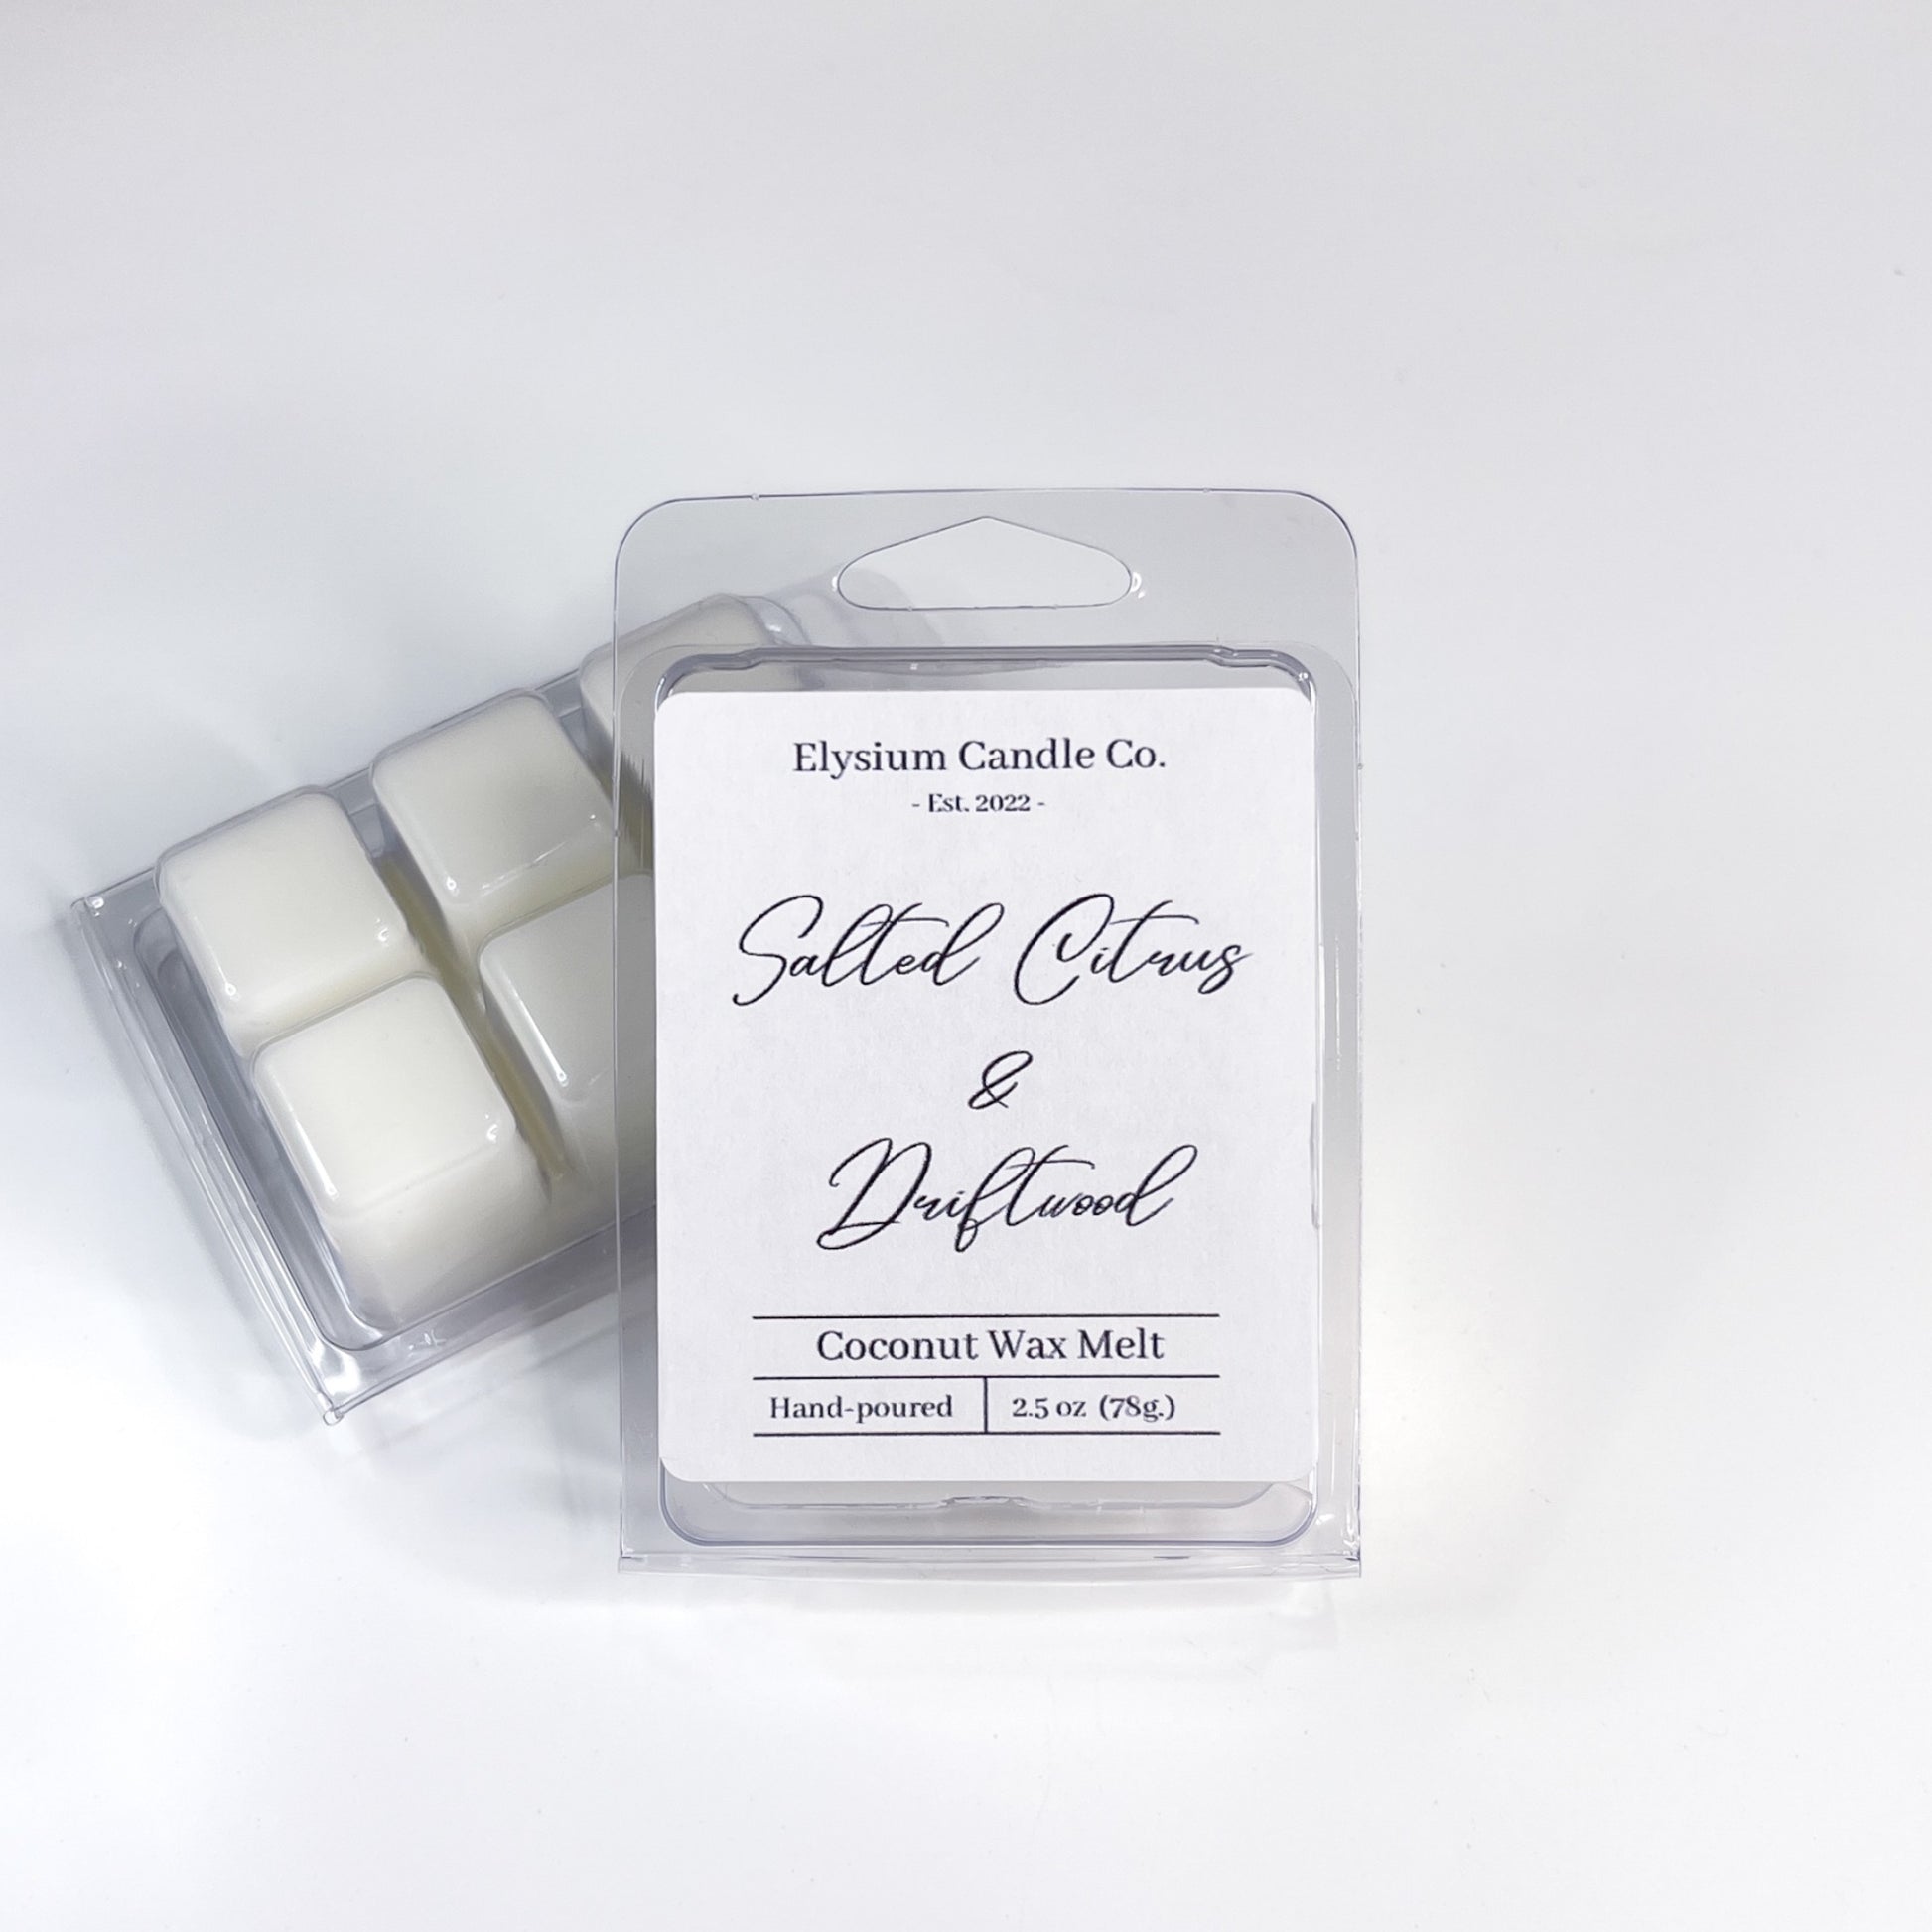 salted citrus and driftwood scented wax melt